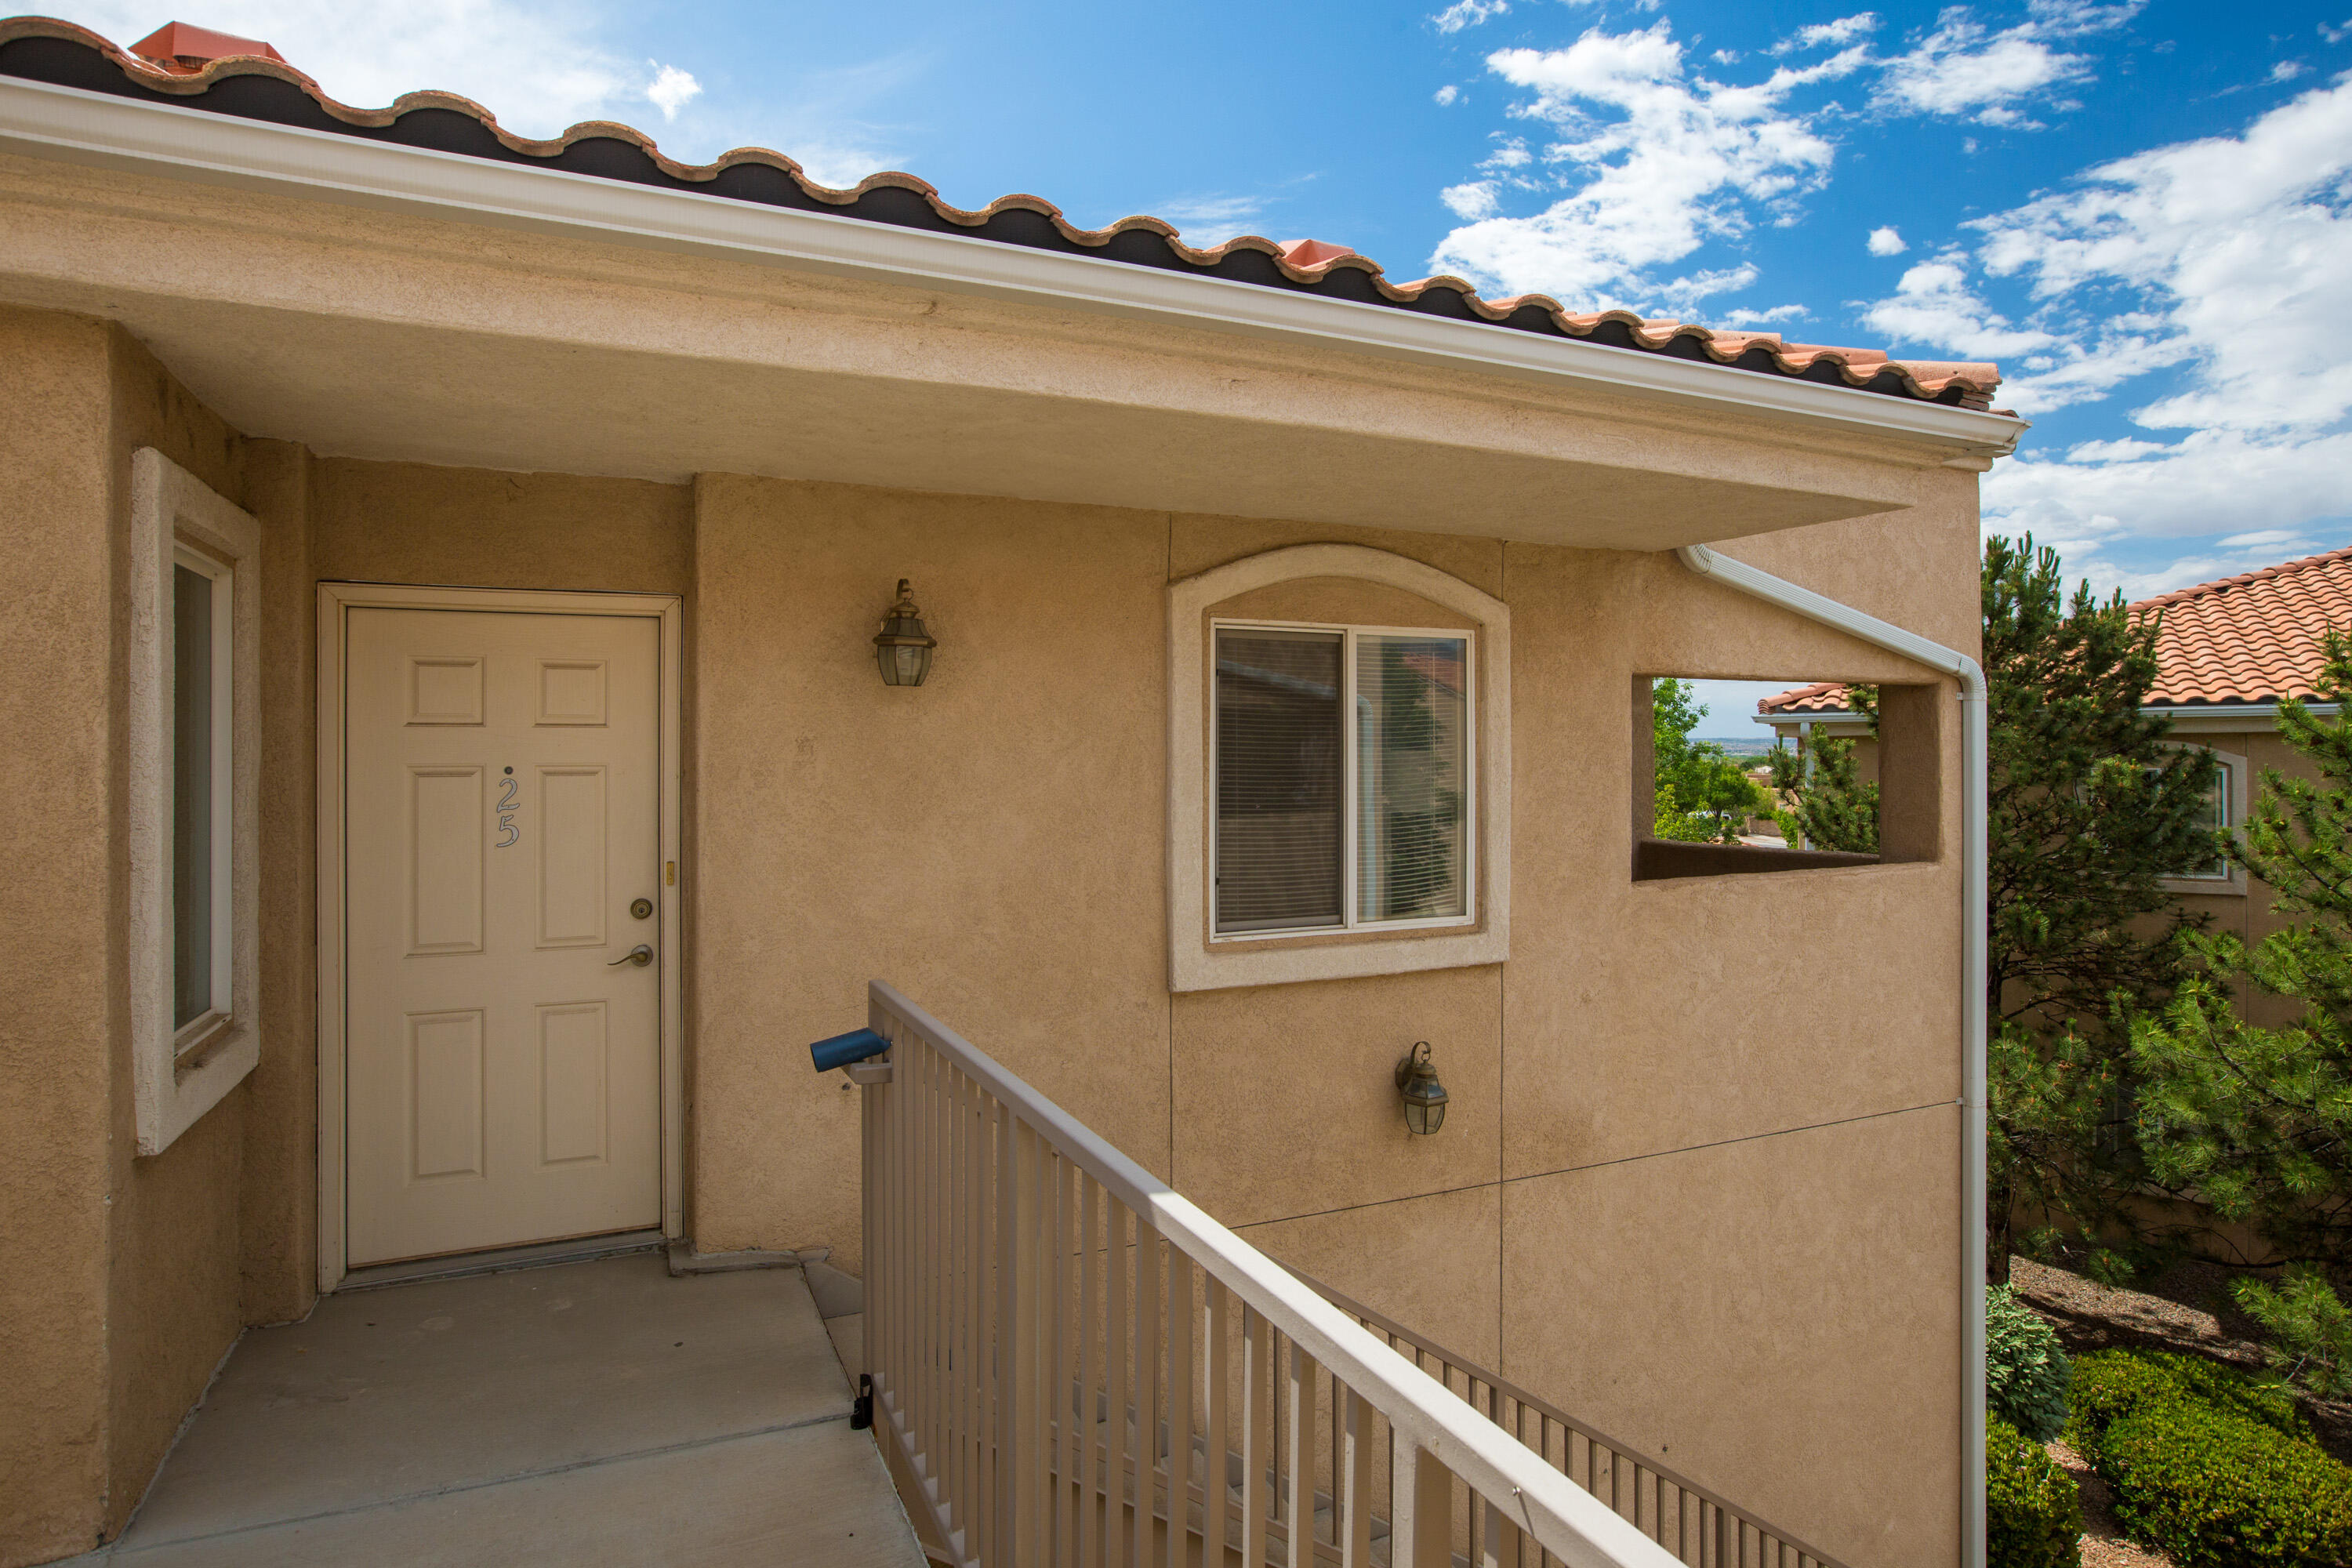 Easy, carefree living in gated, well-maintained community of Rancho Mirage! This top-floor condo offers the utmost convenience w/no neighbors above you. Enjoy access to amenities including gym, 2 swimming pools, & clubhouse plus HOA covers common areas/bldg exterior/water/ trash/sewer. This 1-bedroom, 1-bathroom residence featuring spacious living area, dining area & bk-bar. Kitchen equipped w/gas stove, frig & dishwasher, along w/ample counter space. The bedroom boasts walk-in closet & the unit offers refrigerated air for year-round comfort. Additional features include a laundry rm w/ washer/dryer + room for storage, detached 1-car GA + 1 parking space. Relax & unwind on the covered balcony or explore the nearby walking trails & parks. Convenient to freeway, shopping, dining & much MORE!